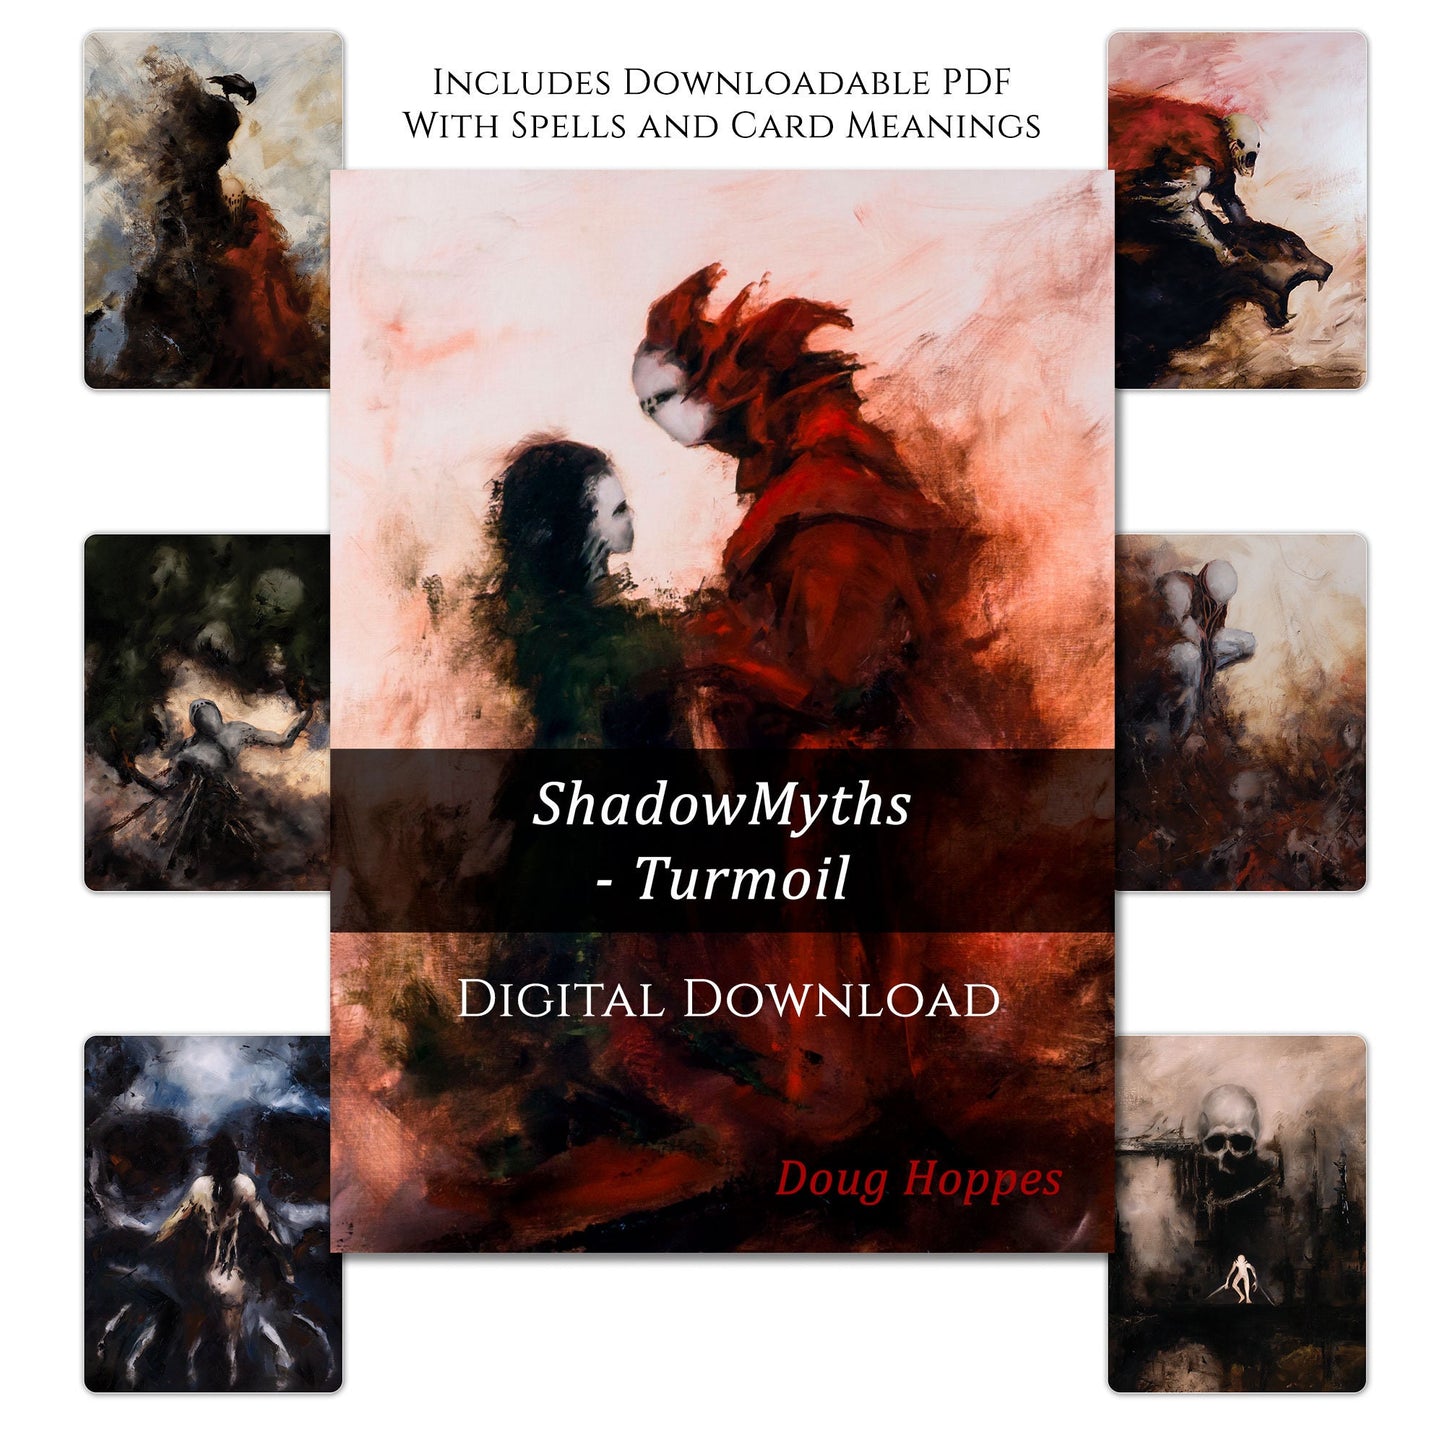 Turmoil Deck with Downloadable Content Used for Oracle Reading, Dungeons and Dragons and Story Ideas